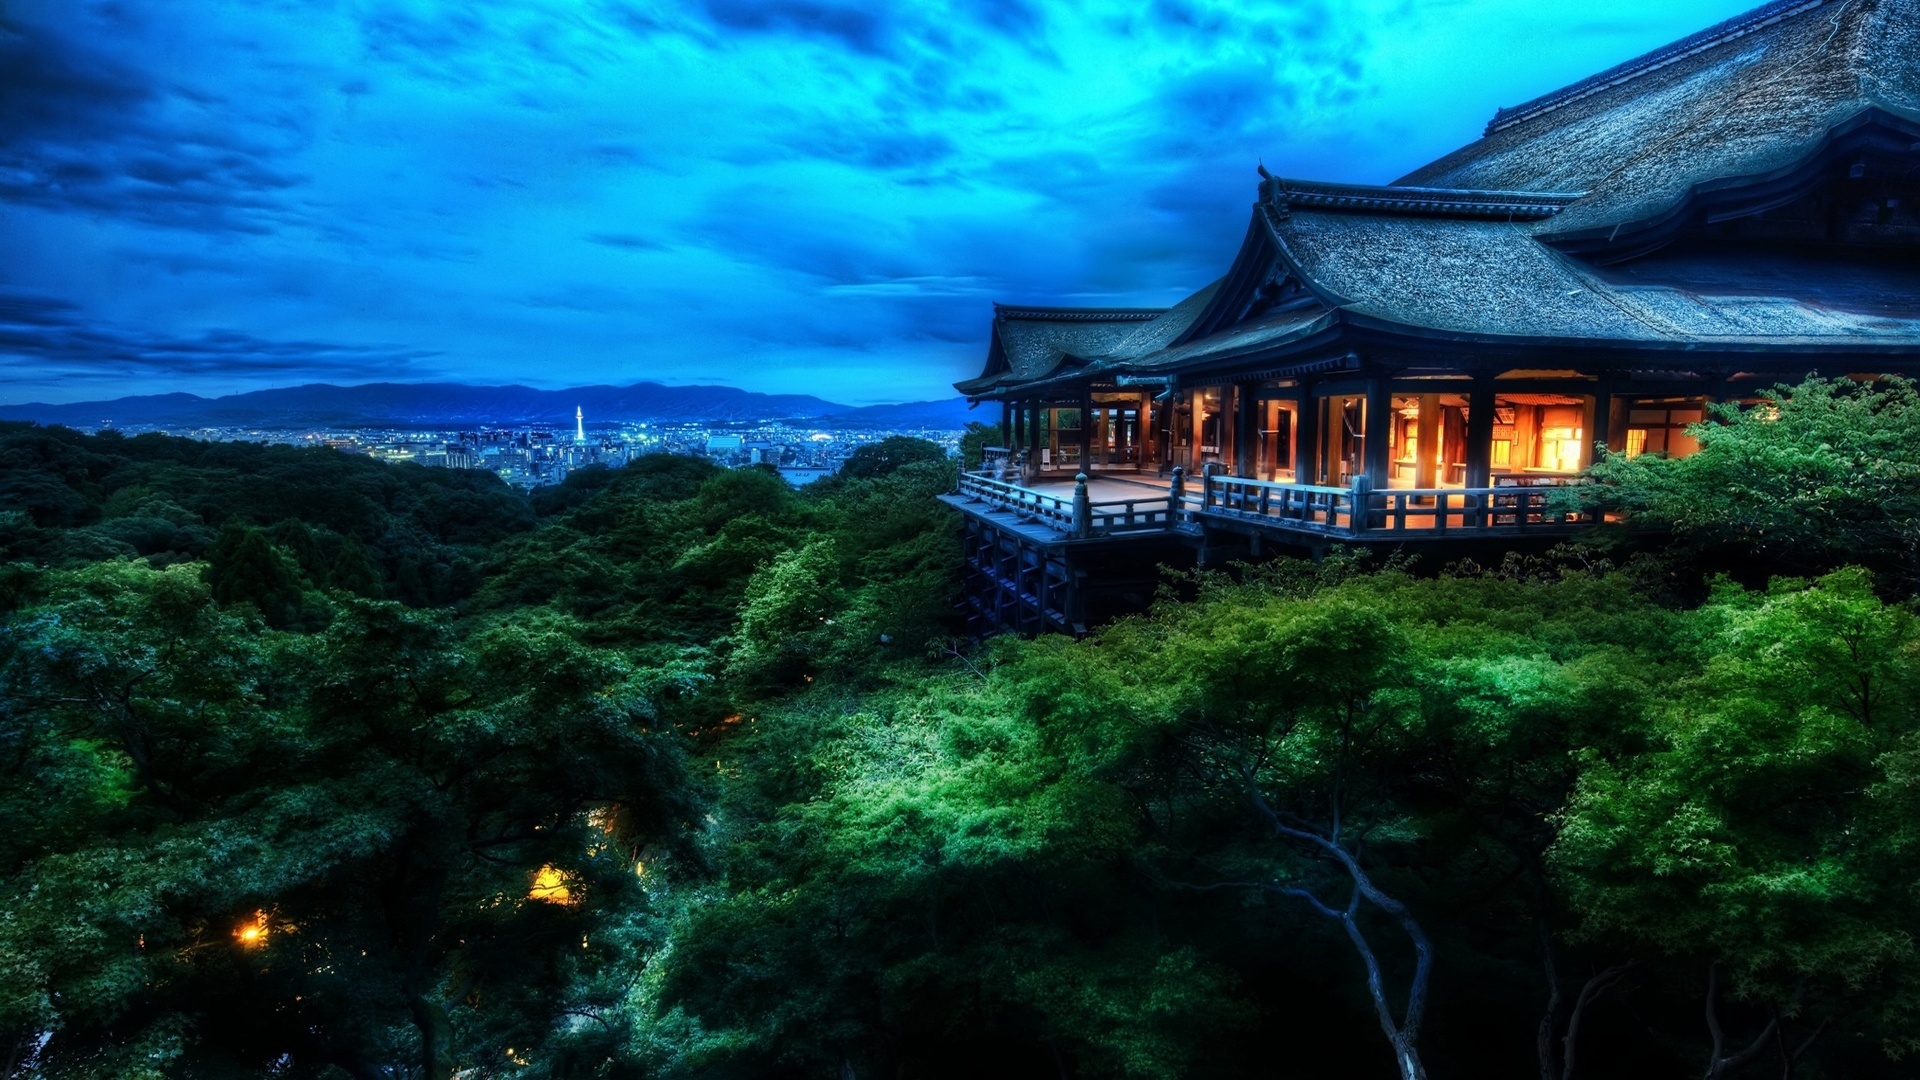 Kyoto Japan for 1920 x 1080 HDTV 1080p resolution